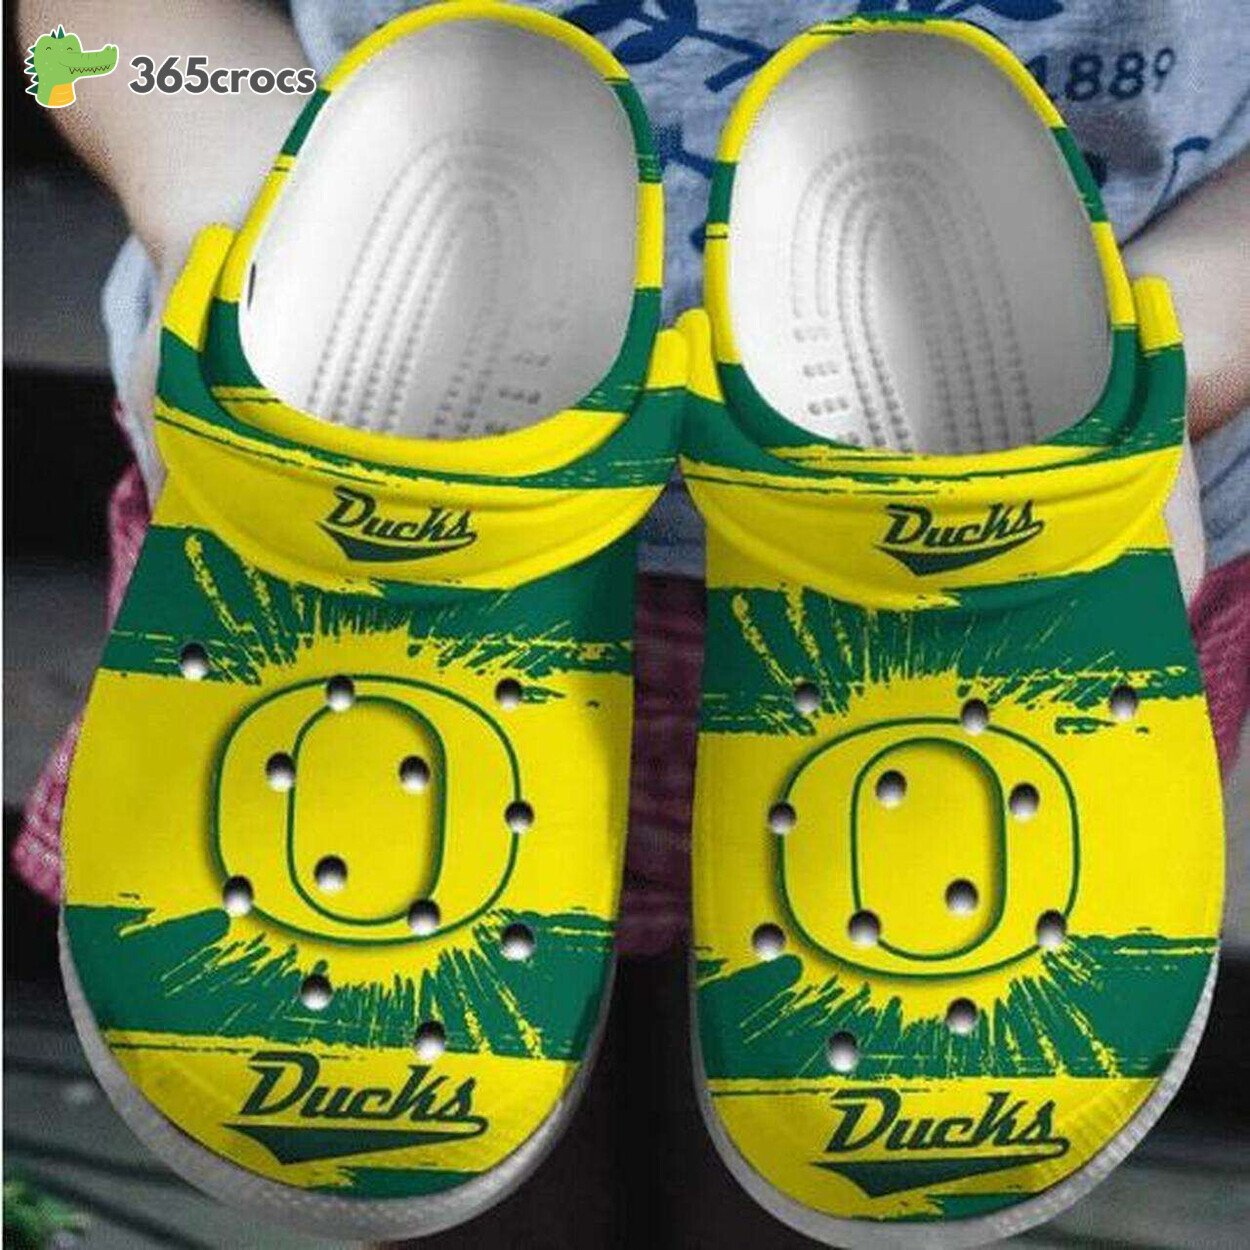 Oregon Ducks NCAA Football Passion Embodied in Classic Clog Footwear